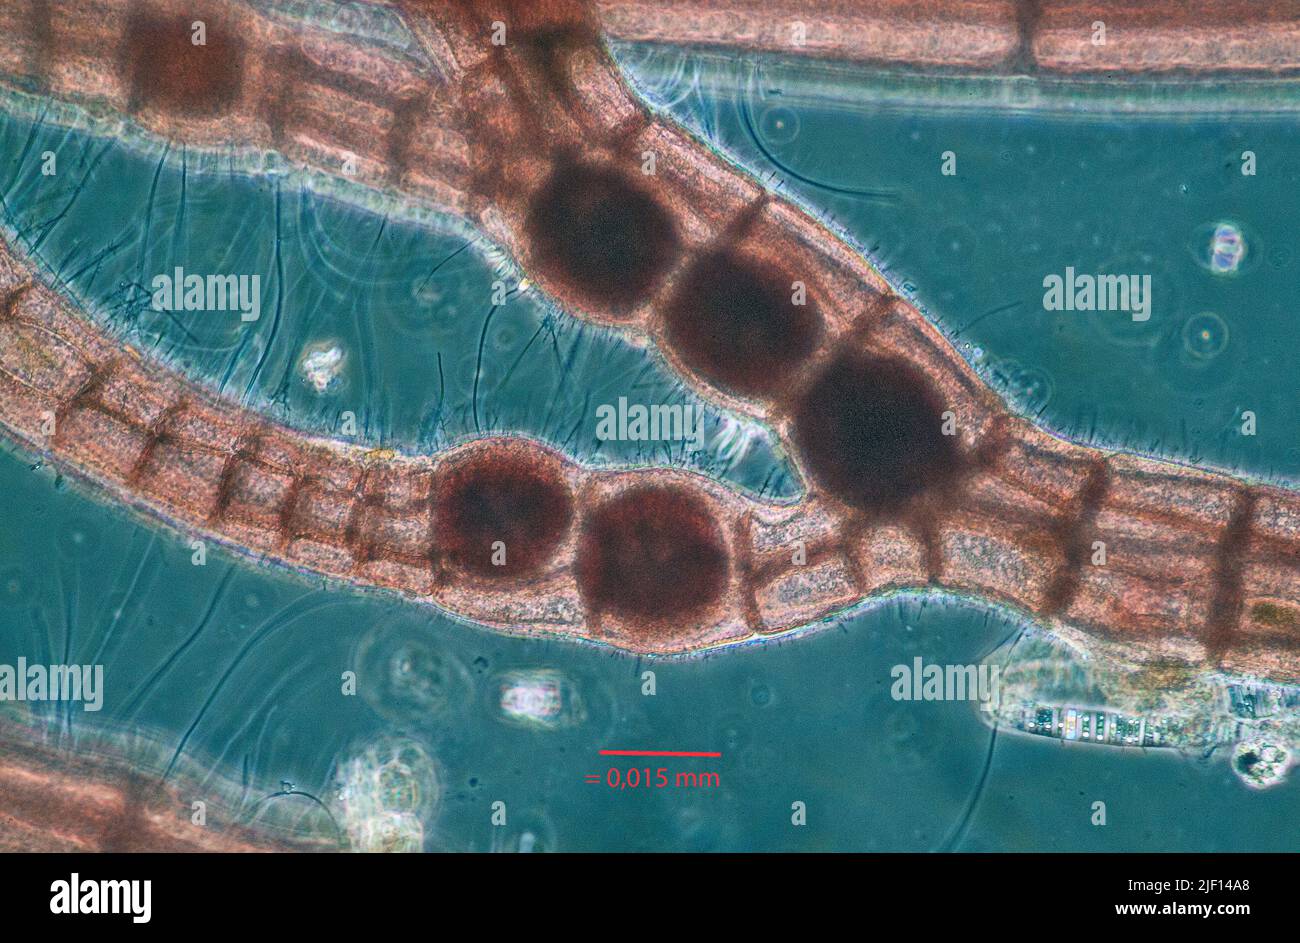 Tetrasporangia forming in the cells of the sporophyte of Polysiphonia sp. Stock Photo